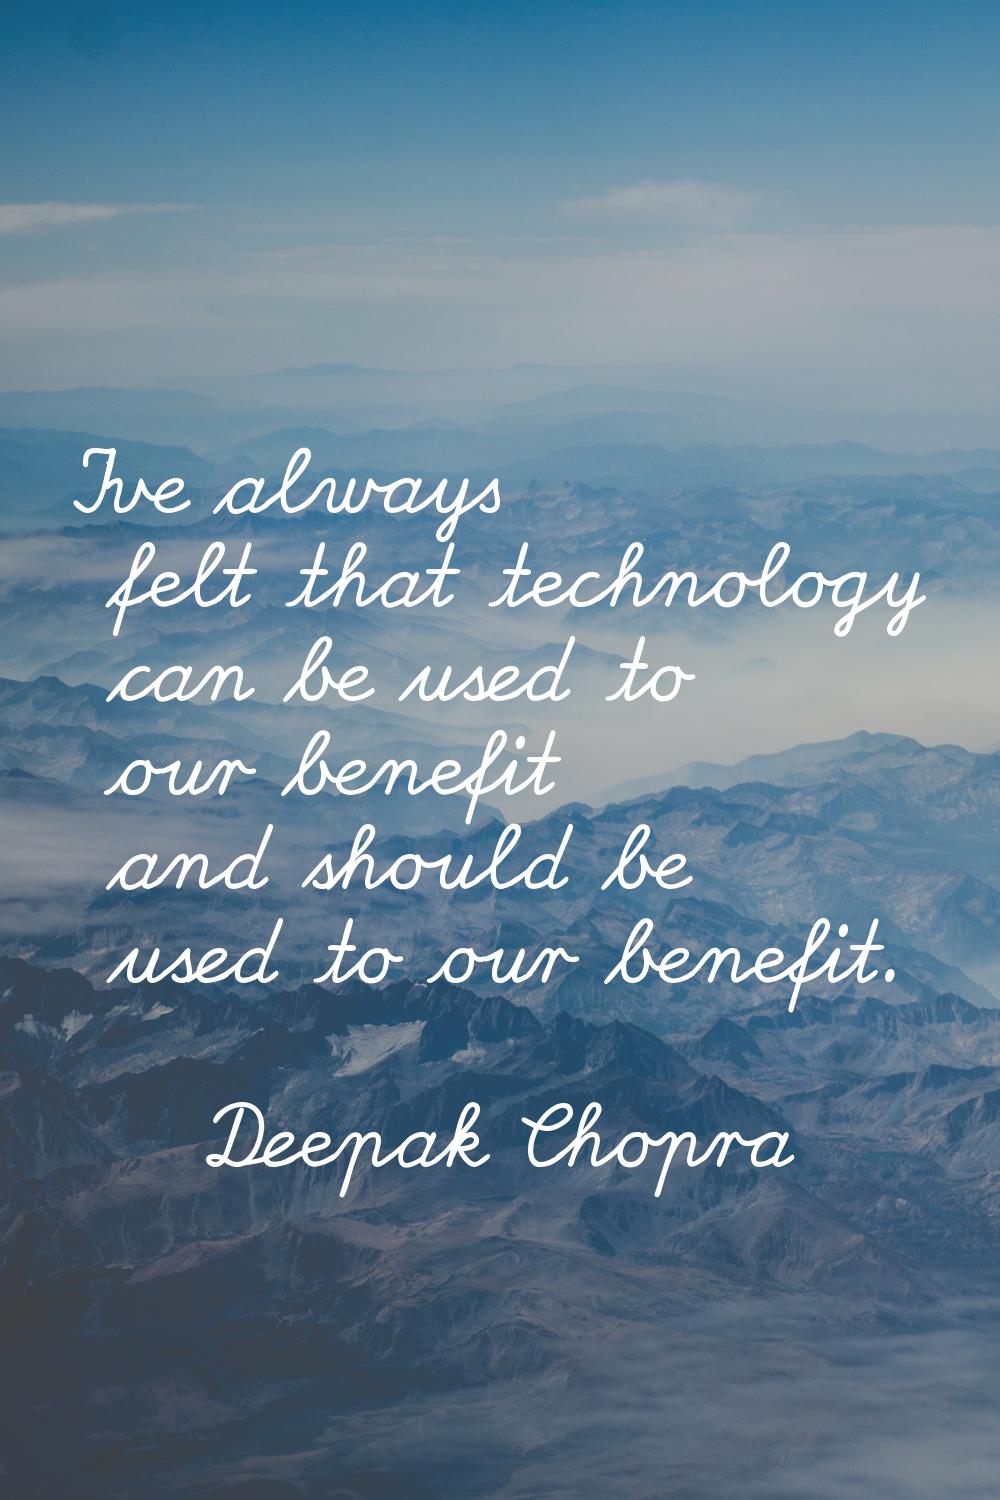 I've always felt that technology can be used to our benefit and should be used to our benefit.